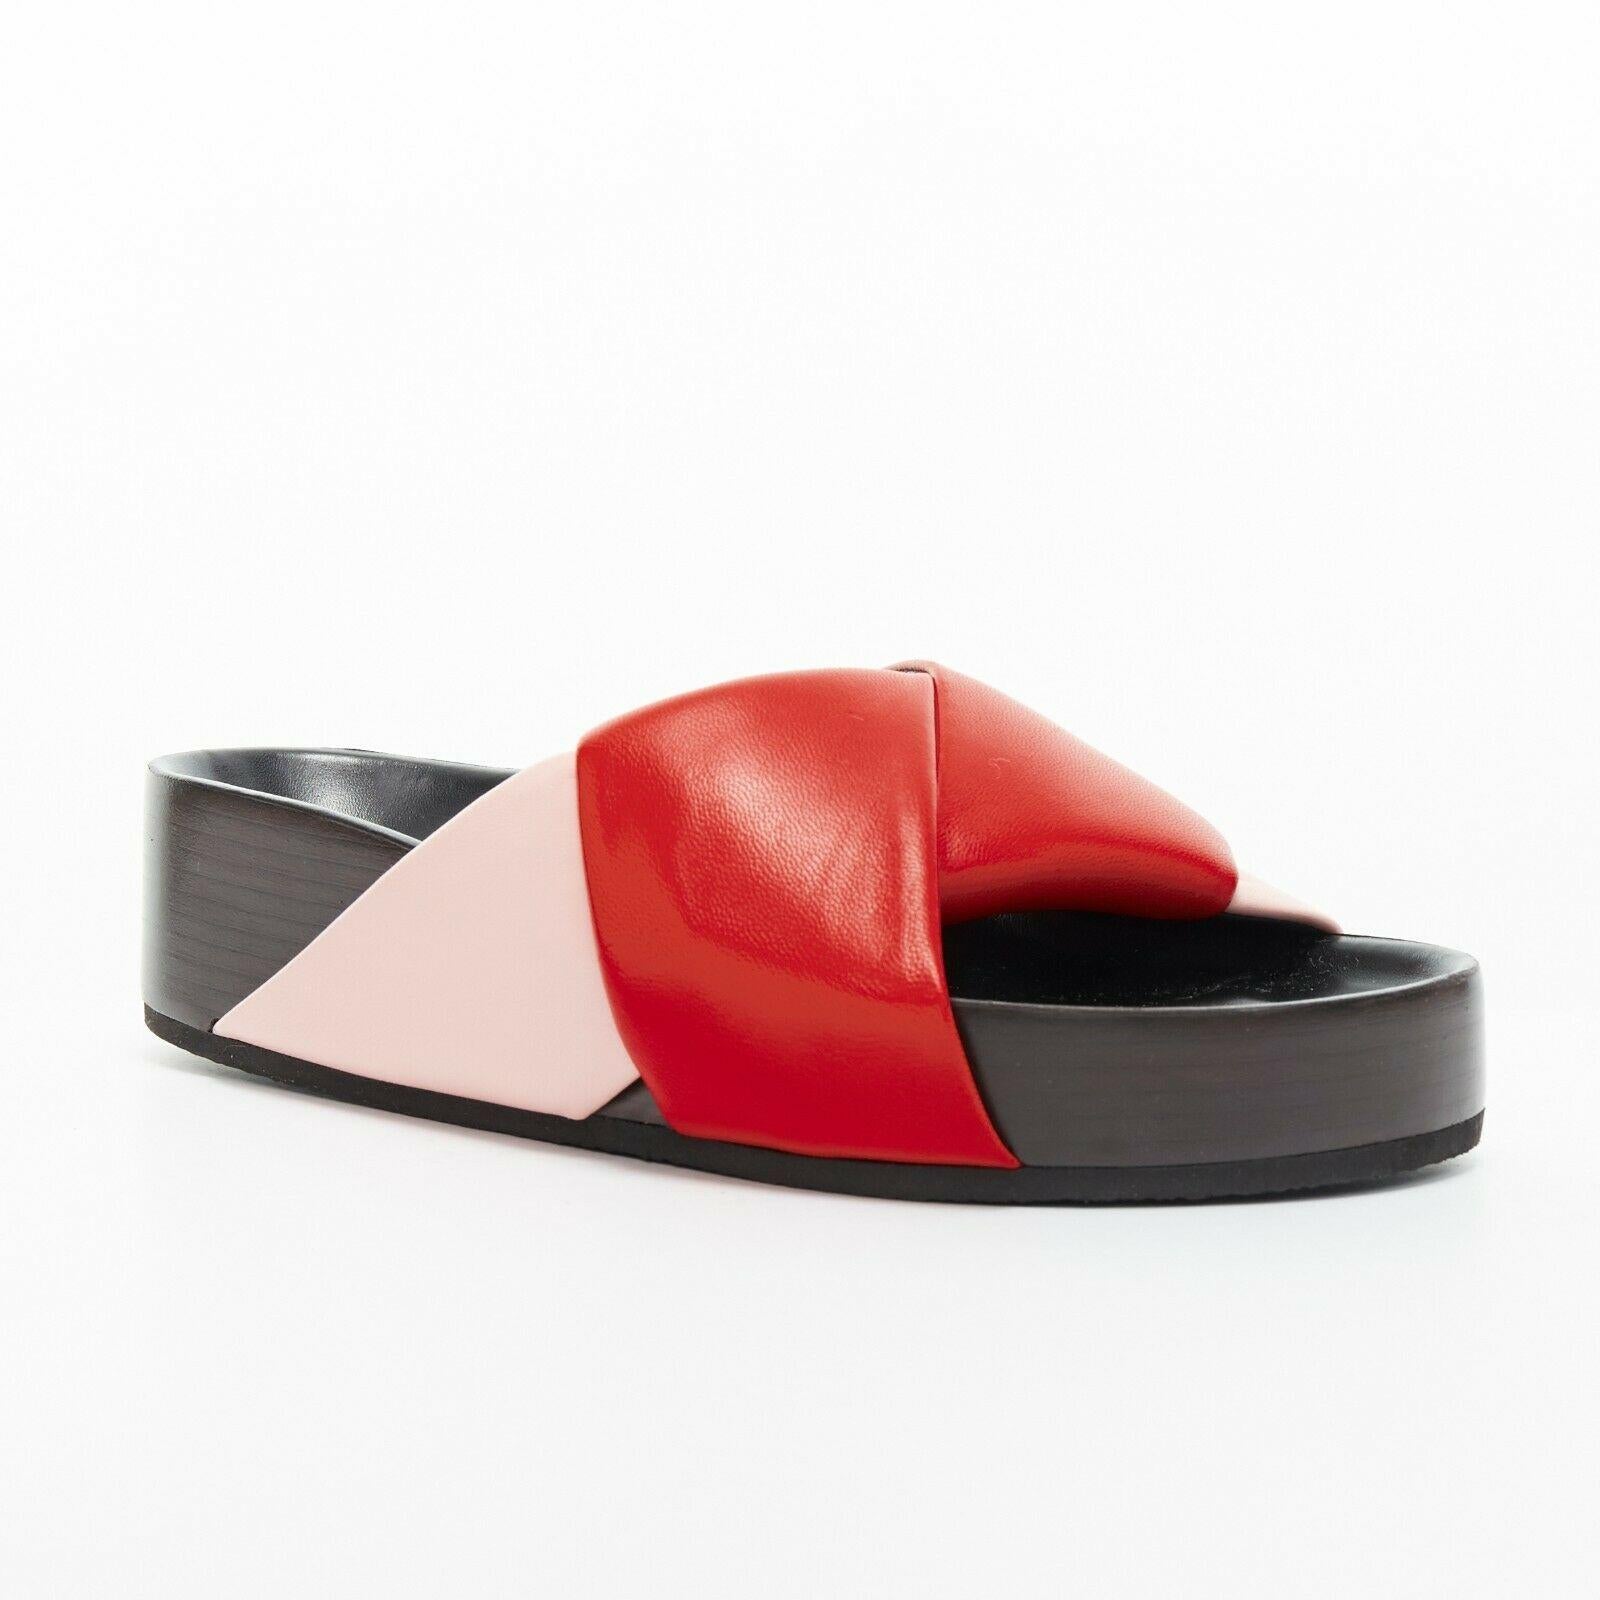 new CELINE PHOEBE PHILO red pink padded leather twist slides sandals EU36

CELINE BY PHOEBE PHILO
Light pink and red padded leather. Origami twist upper. strap. 
Open toe. Dark brown stacked wooden sole. 
Leather lining. Moulded footbed. Thick sole.